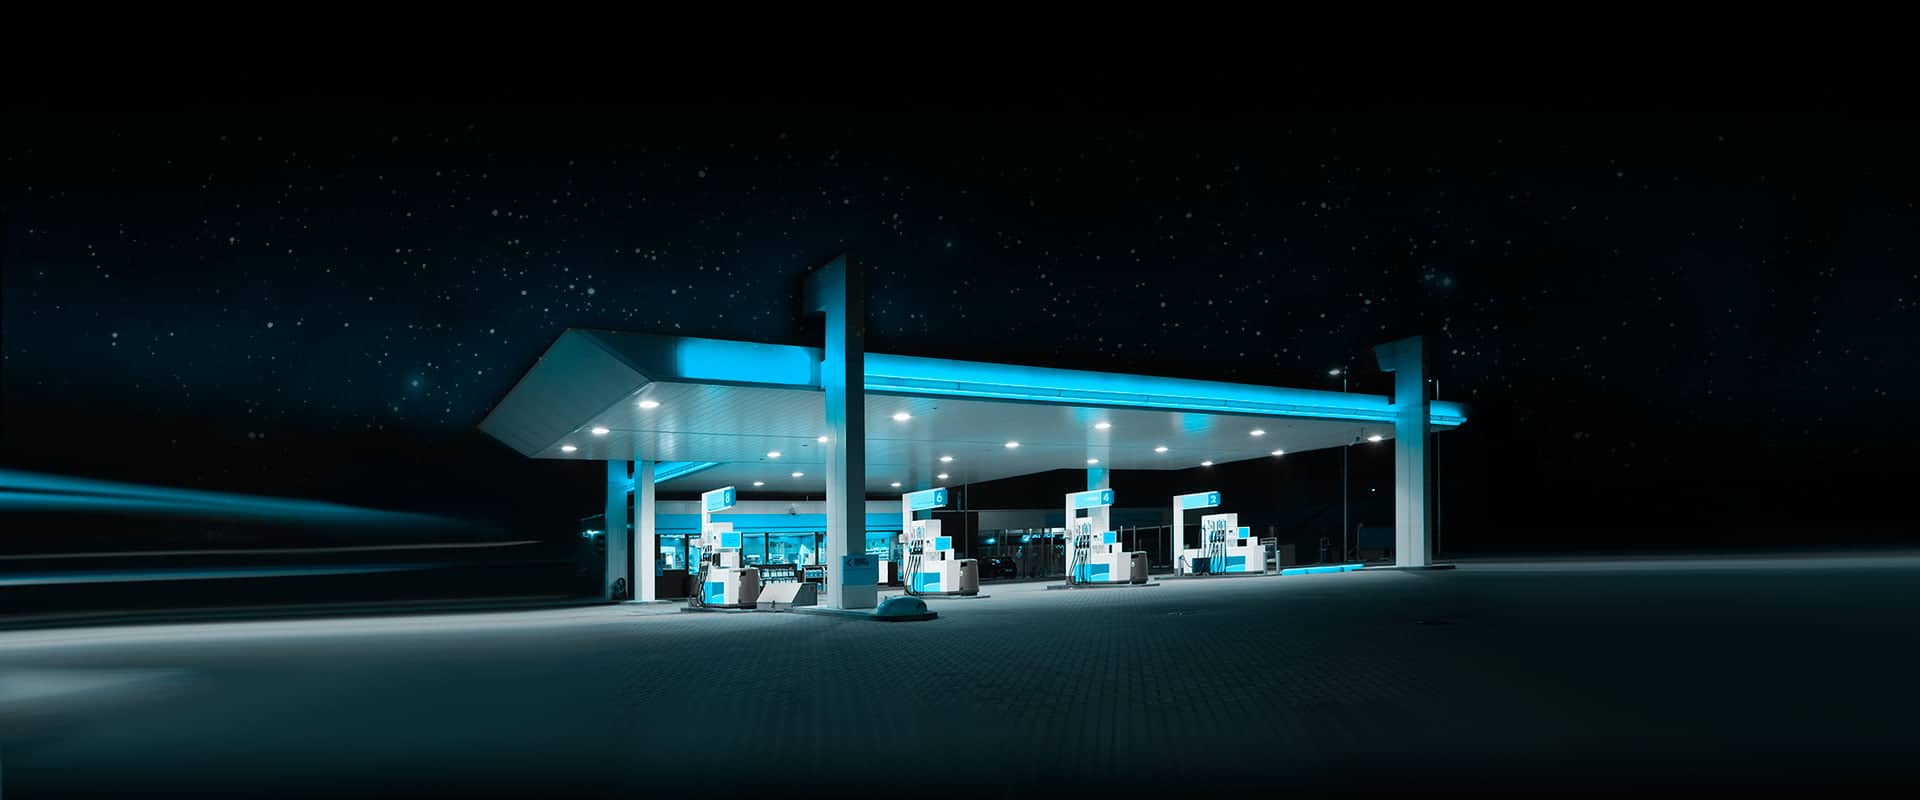 A wide-angle photo of a service station at night, rendered in blue and black tones